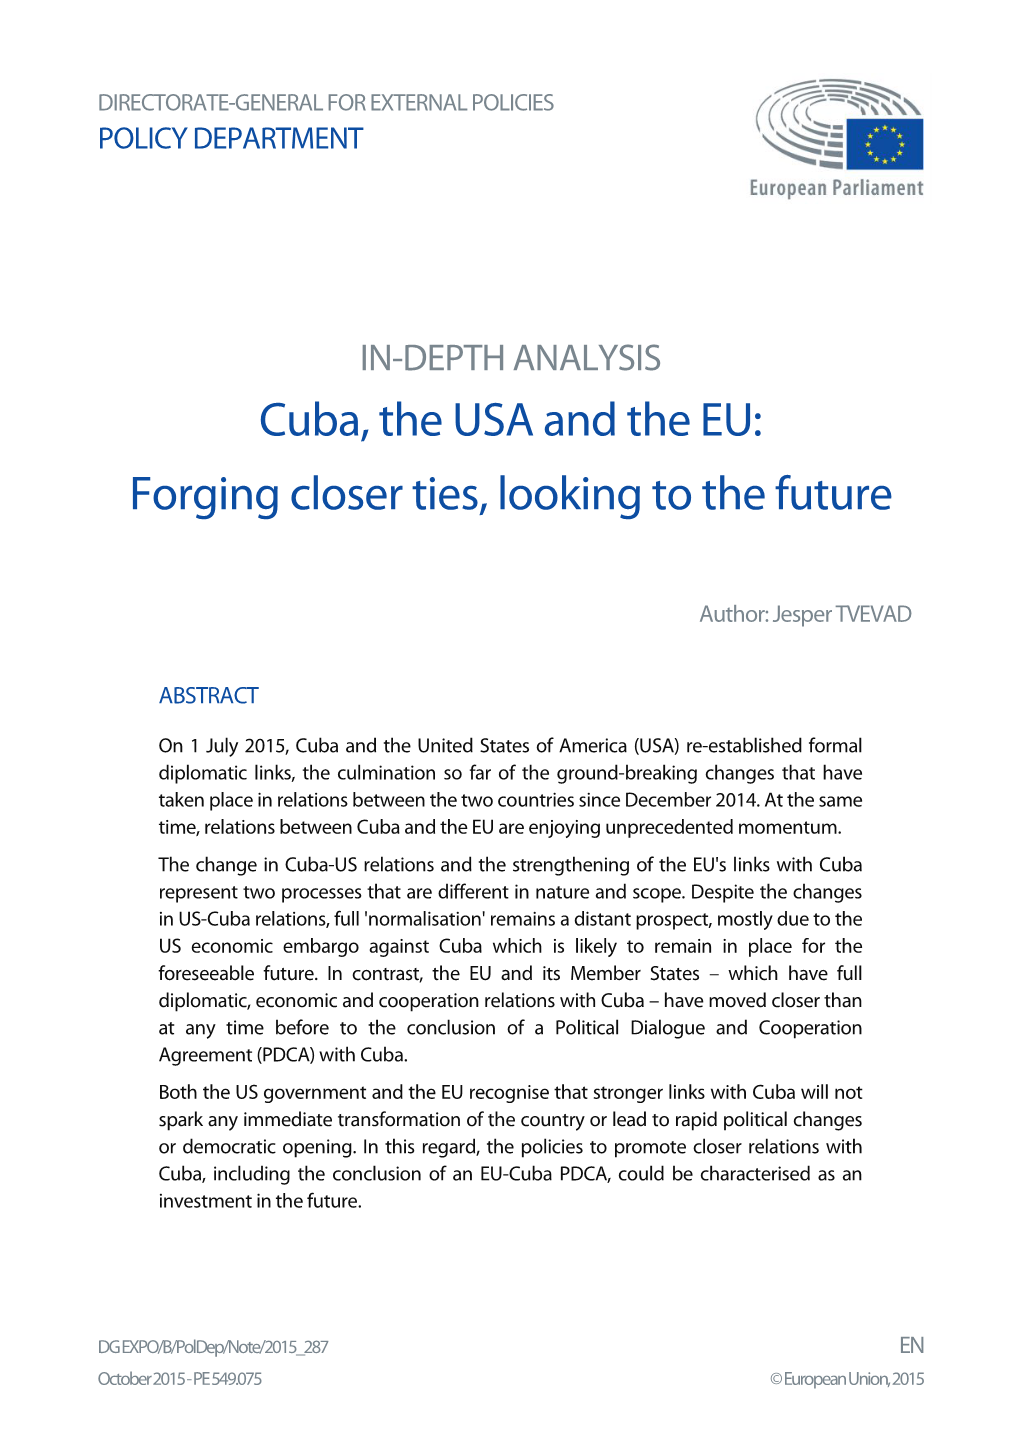 Cuba, the USA and the EU: Forging Closer Ties, Looking to the Future